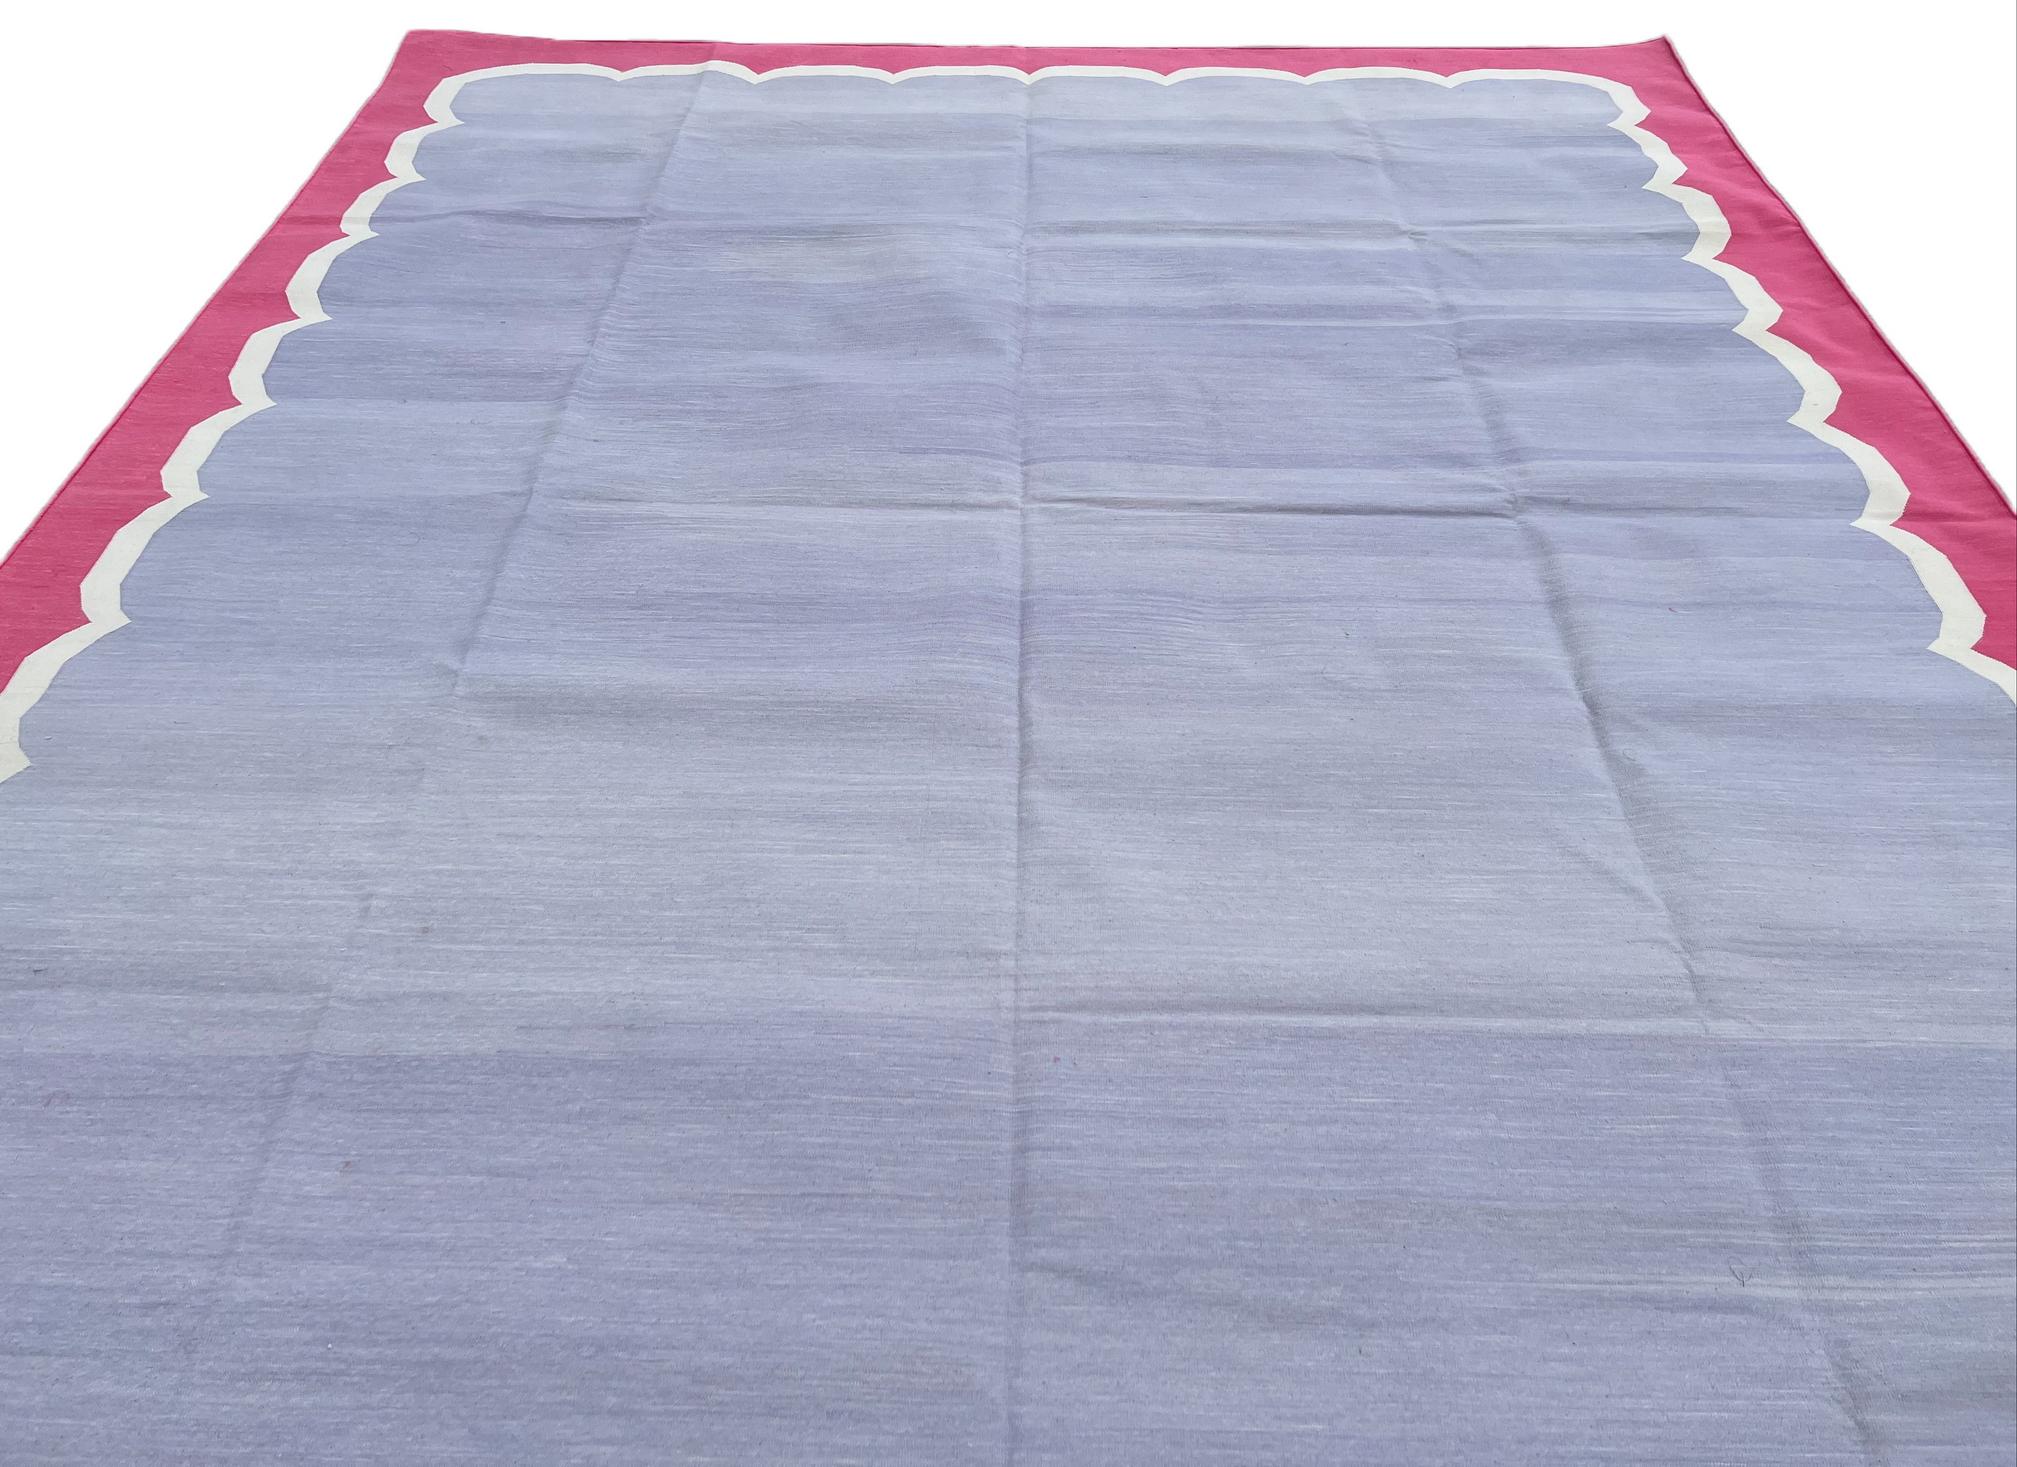 Handmade Cotton Area Flat Weave Rug, 8x10 Lavender, Pink Scallop Indian Dhurrie For Sale 1